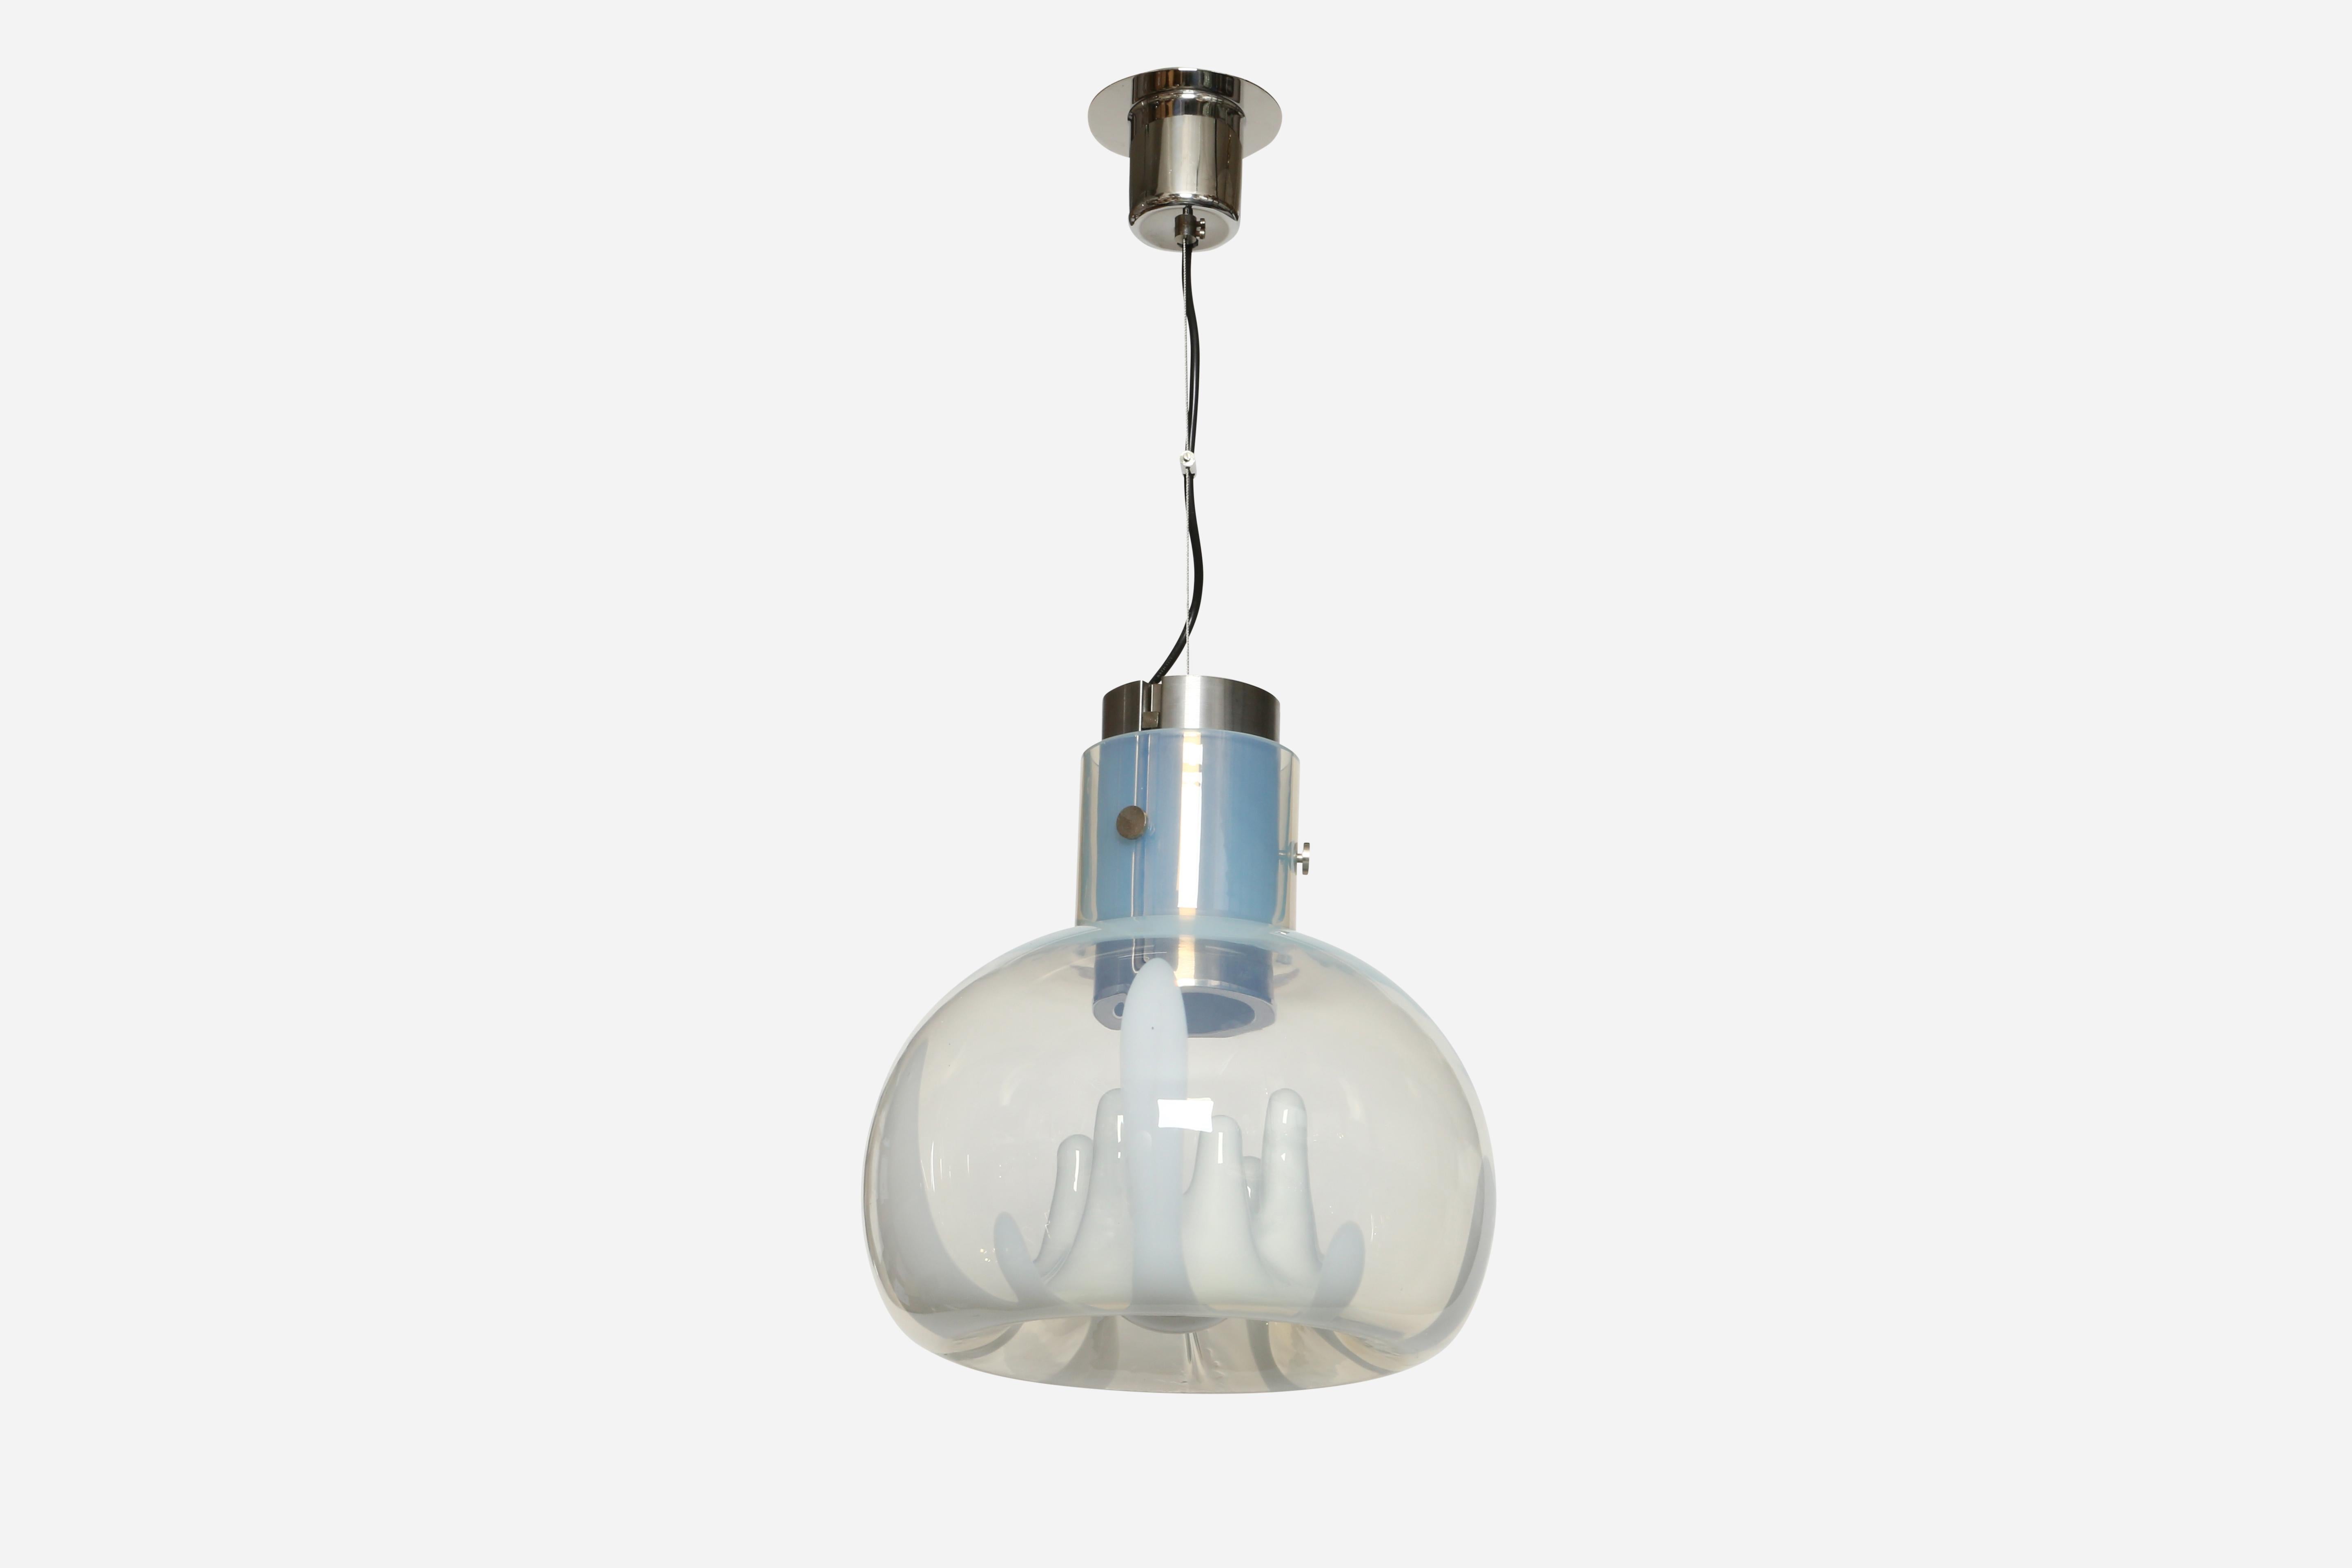 Toni Zuccheri Murano glass suspension.
Italy 1960s
Handblown glass, nickel plated metal.
Takes one medium base bulb.
Rewired for US.
Overall drop is adjustable.
Can be shorter.

At Illustris Lighting our main focus is to deliver lighting fixtures to